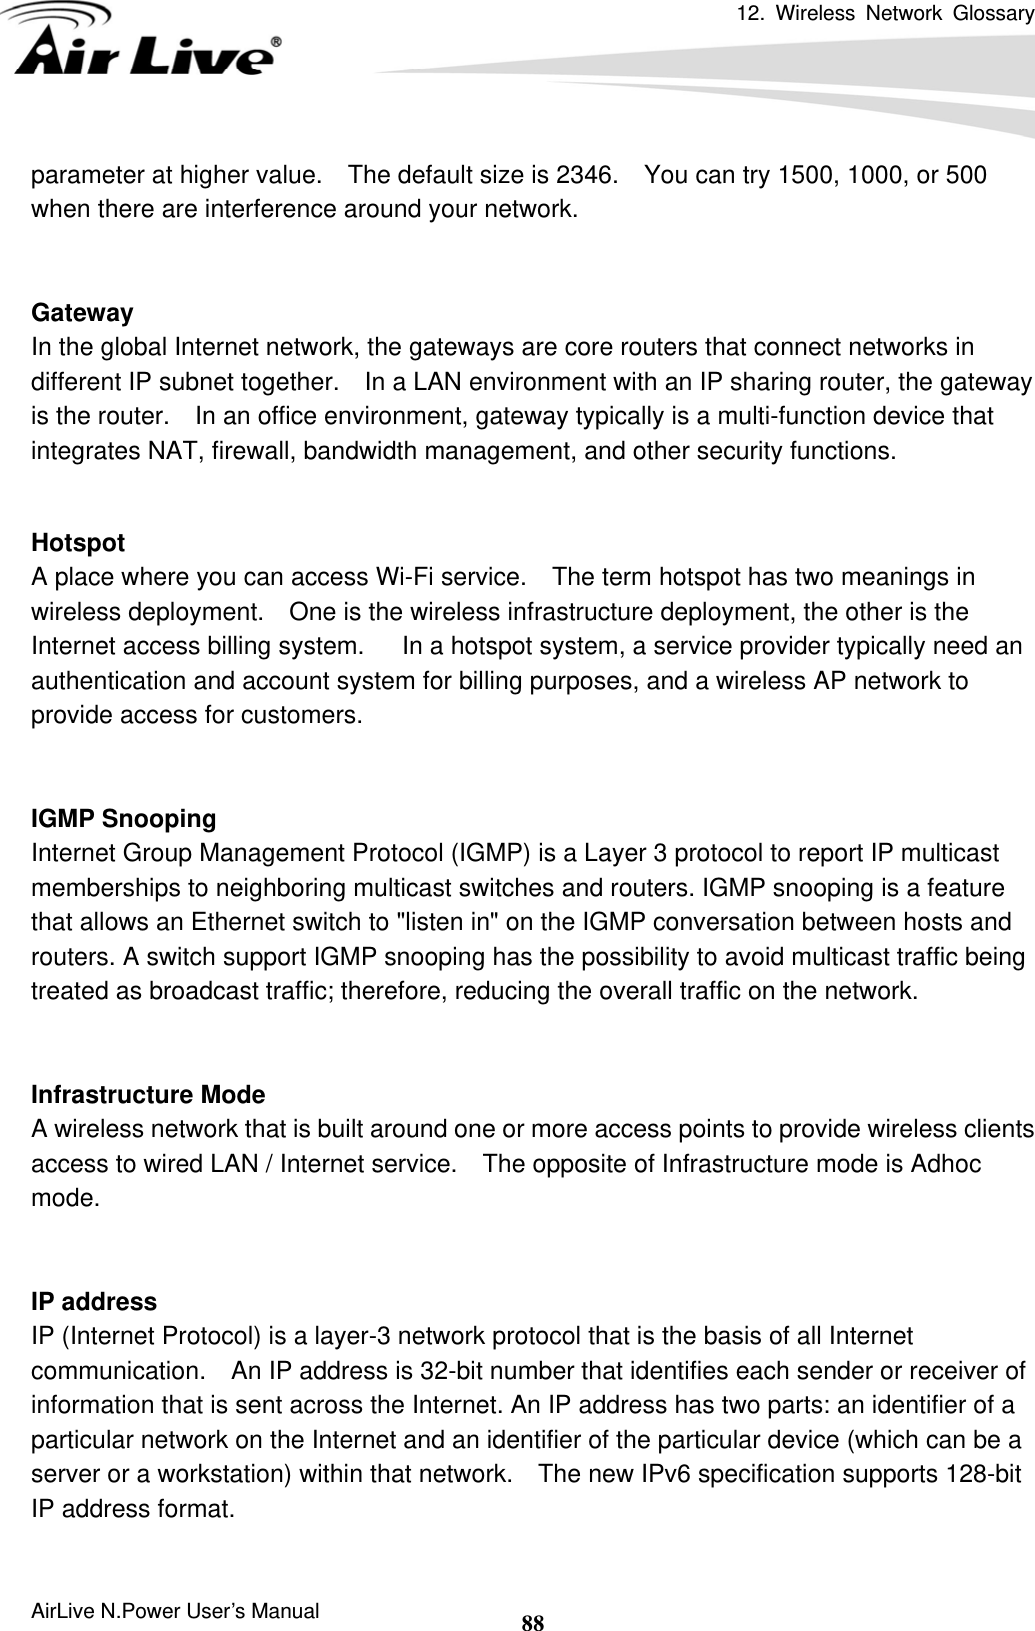 12. Wireless Network Glossary      AirLive N.Power User’s Manual  88parameter at higher value.    The default size is 2346.    You can try 1500, 1000, or 500 when there are interference around your network.   Gateway In the global Internet network, the gateways are core routers that connect networks in different IP subnet together.    In a LAN environment with an IP sharing router, the gateway is the router.    In an office environment, gateway typically is a multi-function device that integrates NAT, firewall, bandwidth management, and other security functions.   Hotspot A place where you can access Wi-Fi service.    The term hotspot has two meanings in wireless deployment.    One is the wireless infrastructure deployment, the other is the Internet access billing system.      In a hotspot system, a service provider typically need an authentication and account system for billing purposes, and a wireless AP network to provide access for customers.   IGMP Snooping Internet Group Management Protocol (IGMP) is a Layer 3 protocol to report IP multicast memberships to neighboring multicast switches and routers. IGMP snooping is a feature that allows an Ethernet switch to &quot;listen in&quot; on the IGMP conversation between hosts and routers. A switch support IGMP snooping has the possibility to avoid multicast traffic being treated as broadcast traffic; therefore, reducing the overall traffic on the network.   Infrastructure Mode A wireless network that is built around one or more access points to provide wireless clients access to wired LAN / Internet service.    The opposite of Infrastructure mode is Adhoc mode.   IP address IP (Internet Protocol) is a layer-3 network protocol that is the basis of all Internet communication.    An IP address is 32-bit number that identifies each sender or receiver of information that is sent across the Internet. An IP address has two parts: an identifier of a particular network on the Internet and an identifier of the particular device (which can be a server or a workstation) within that network.    The new IPv6 specification supports 128-bit IP address format.  